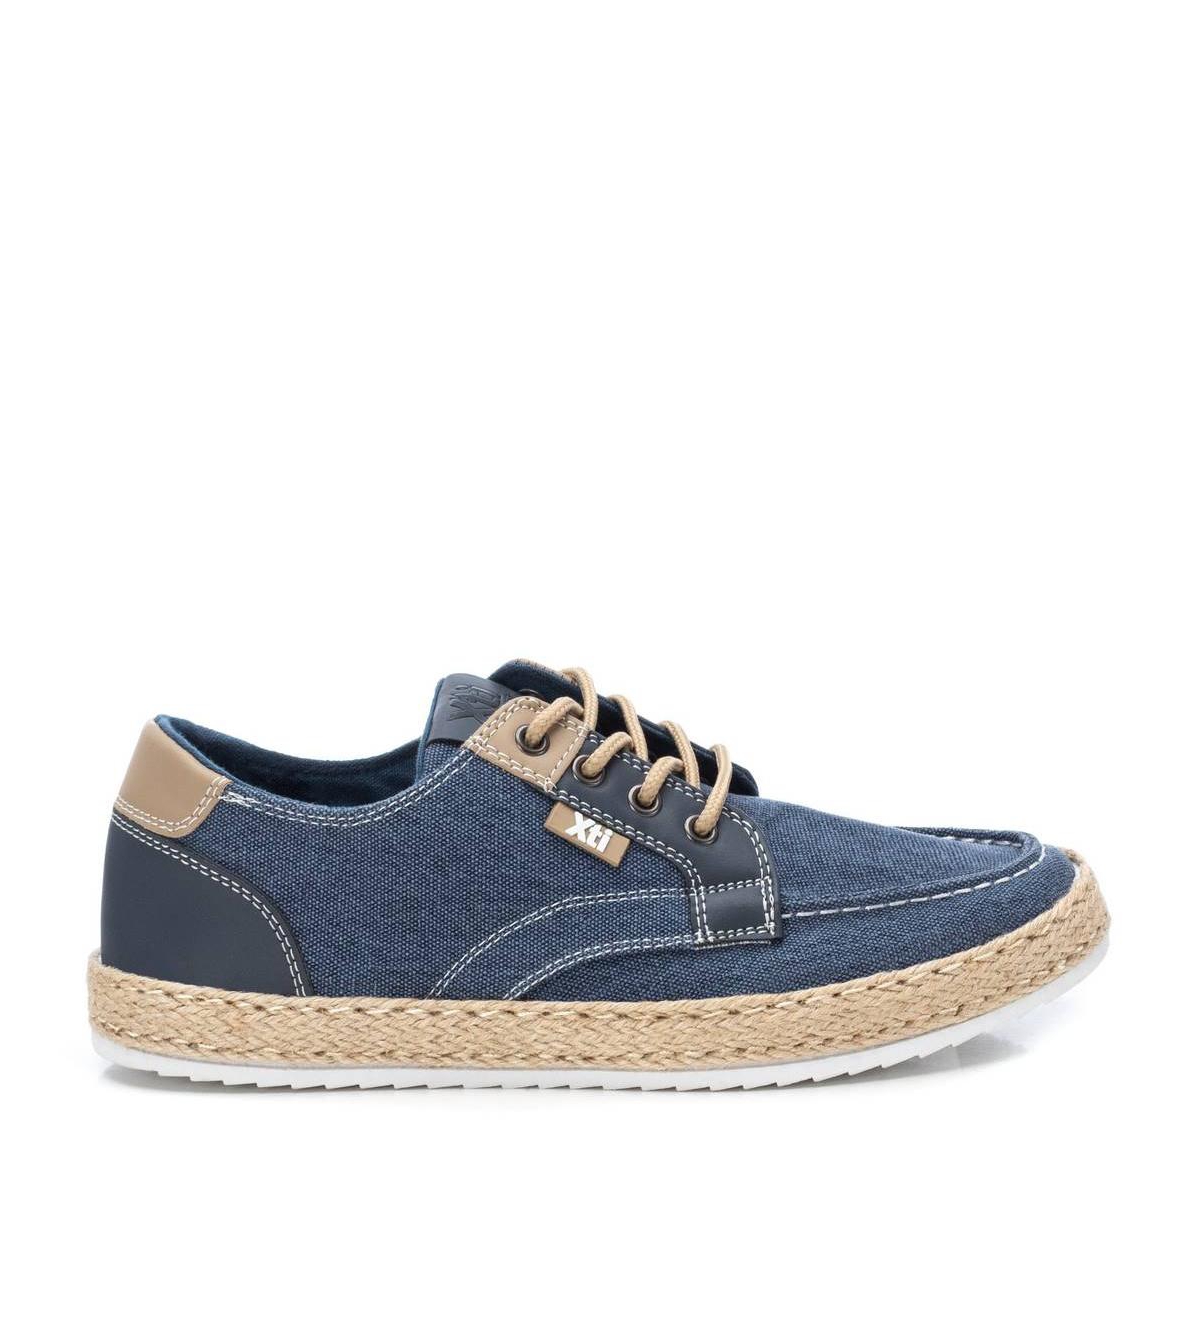 Men's Casual Shoes Armand By - Medium blue